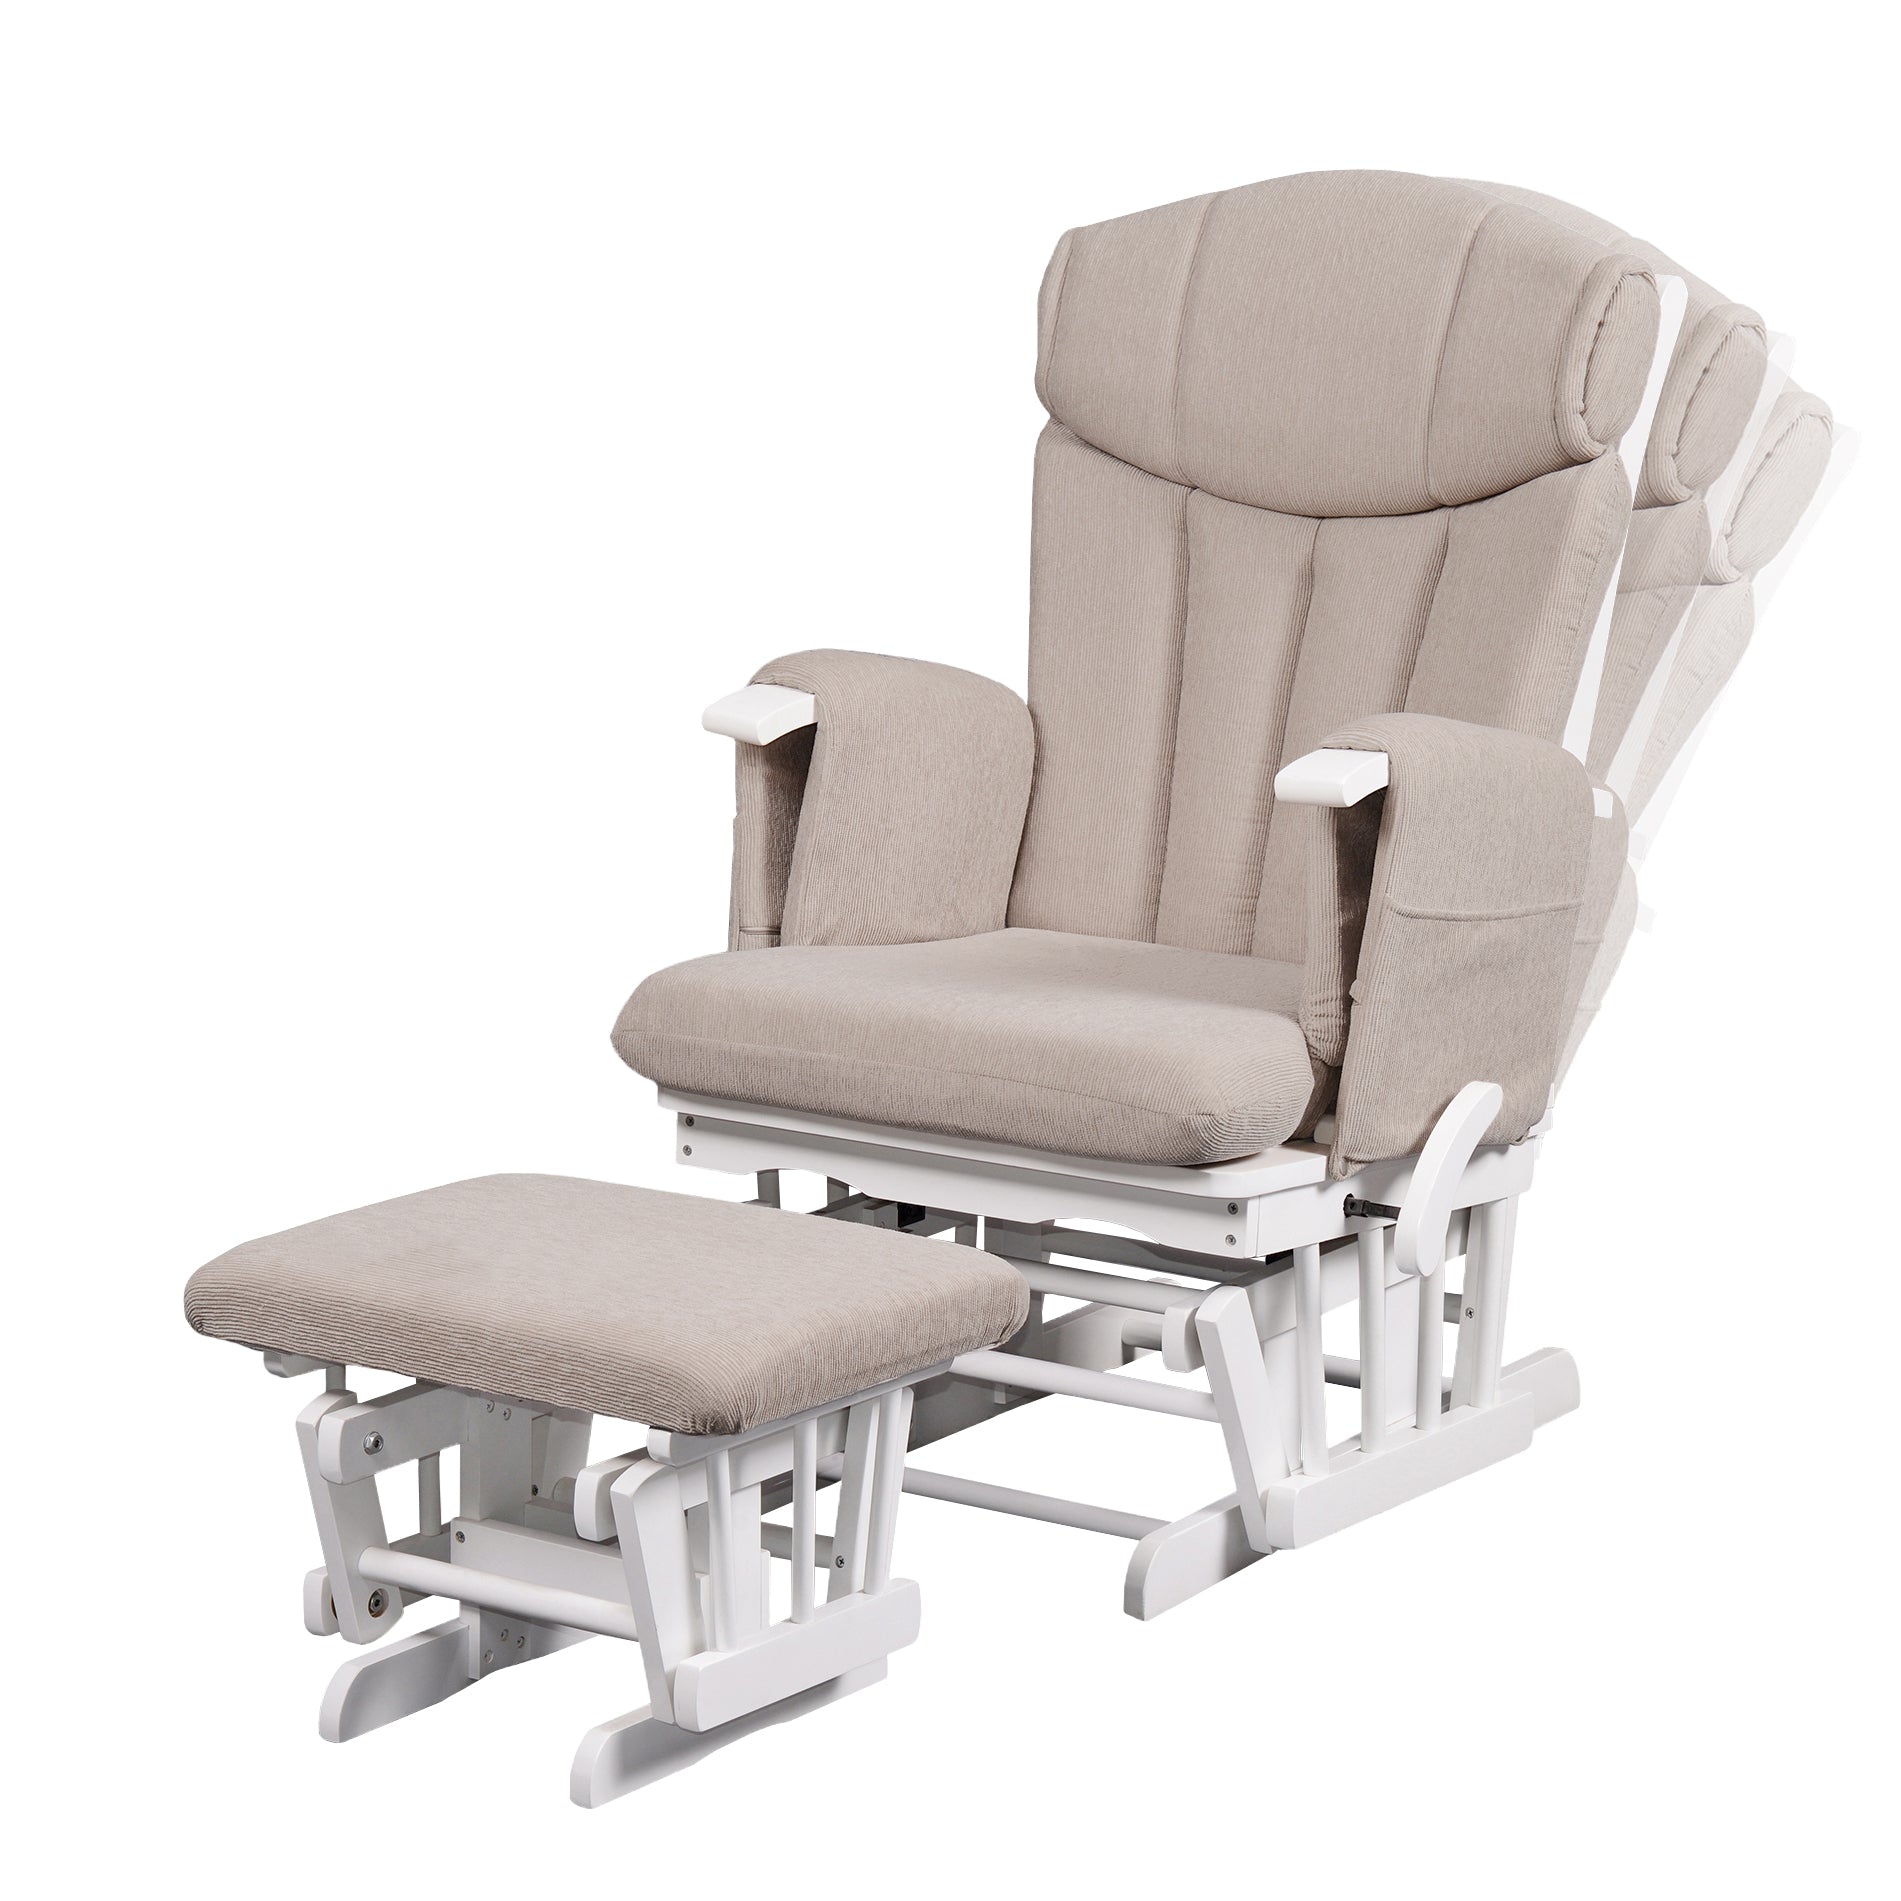 Chatsworth Nursing Chair and Footstool - White Cappuccino